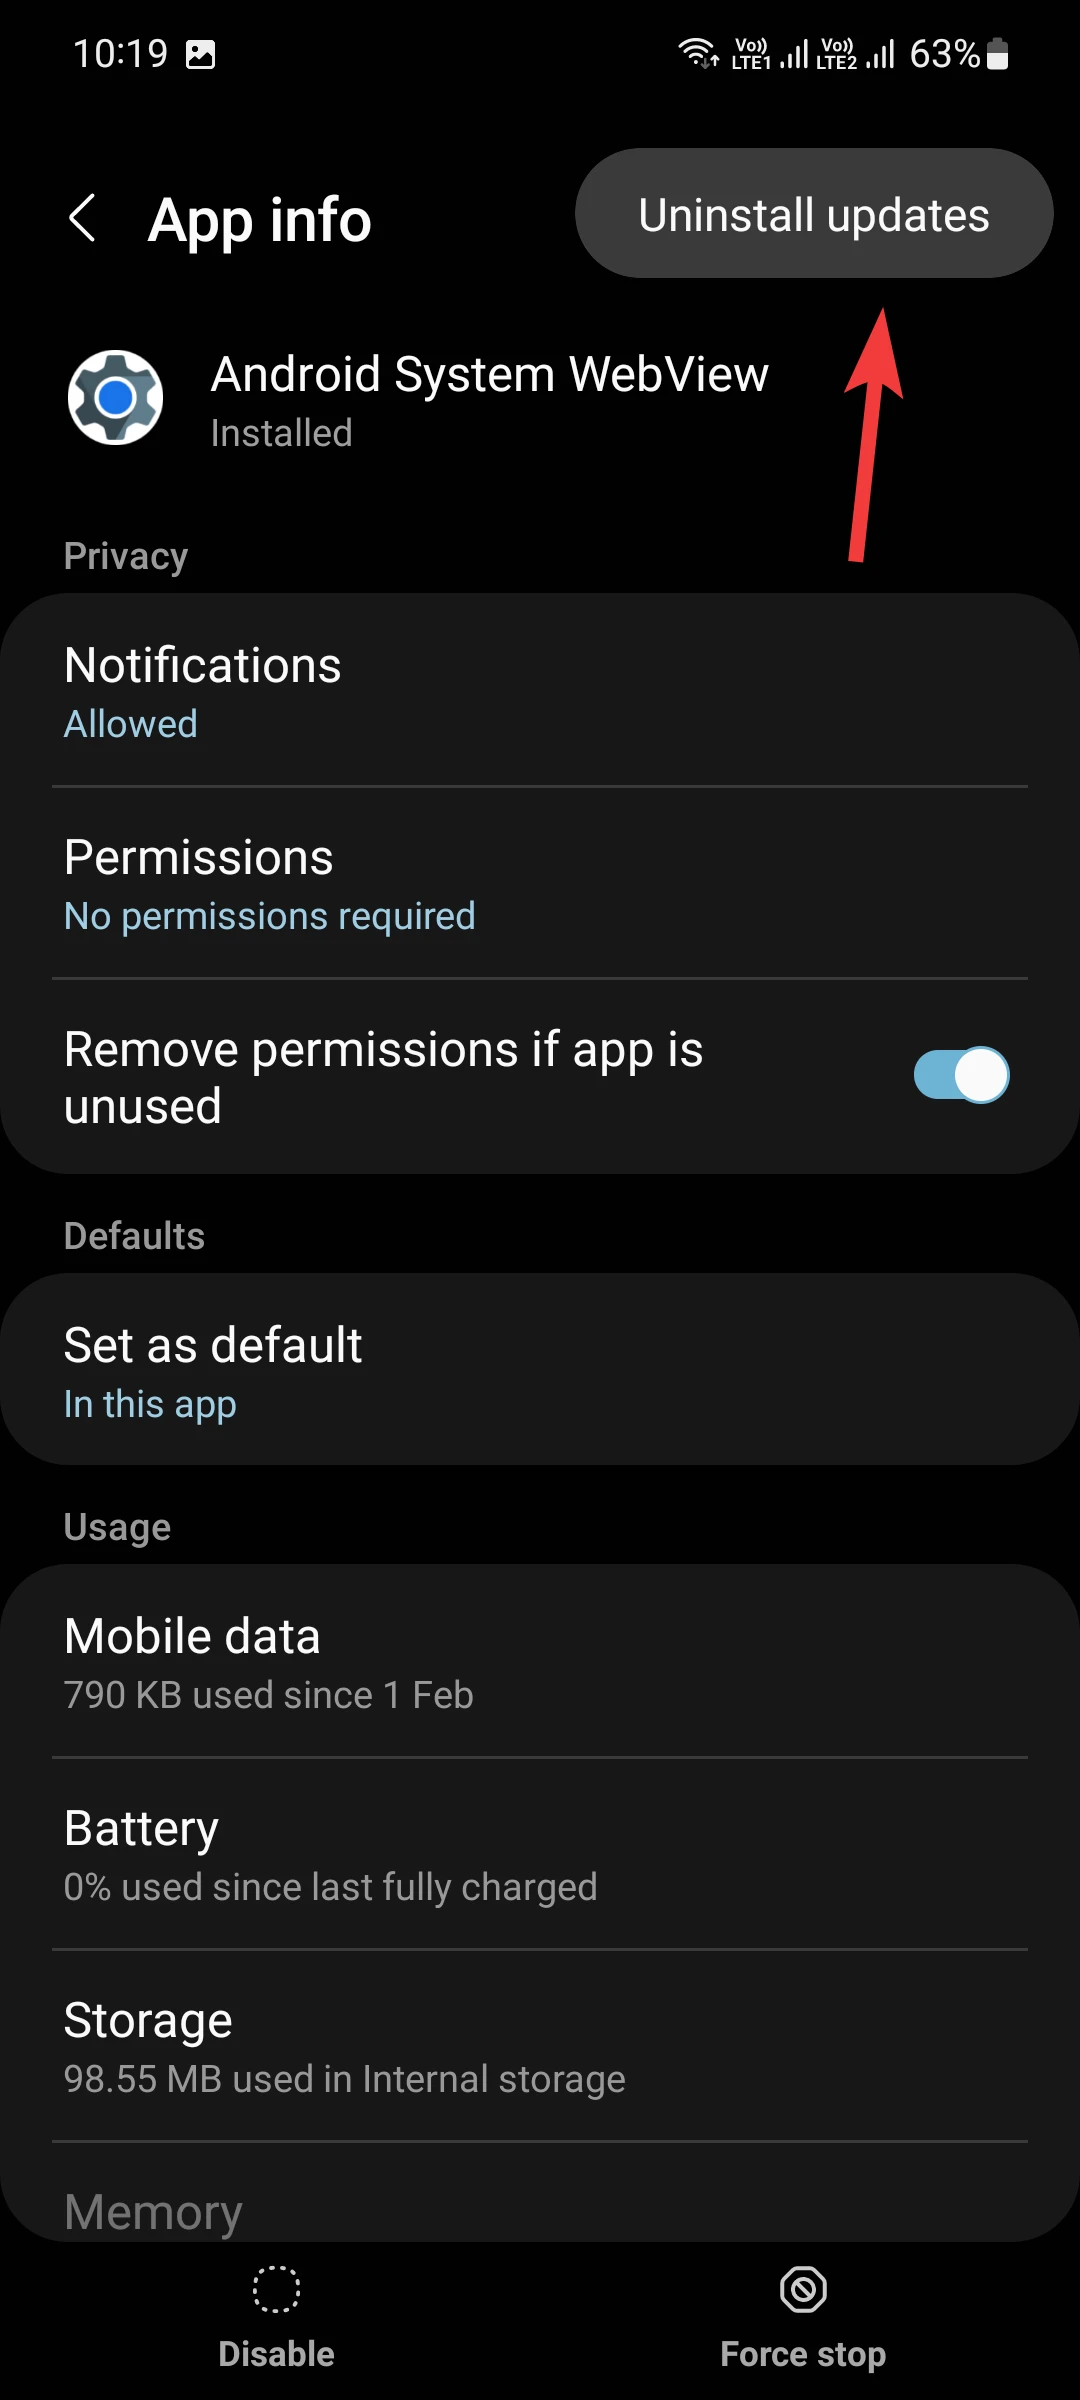 uninstall update option for android system webview